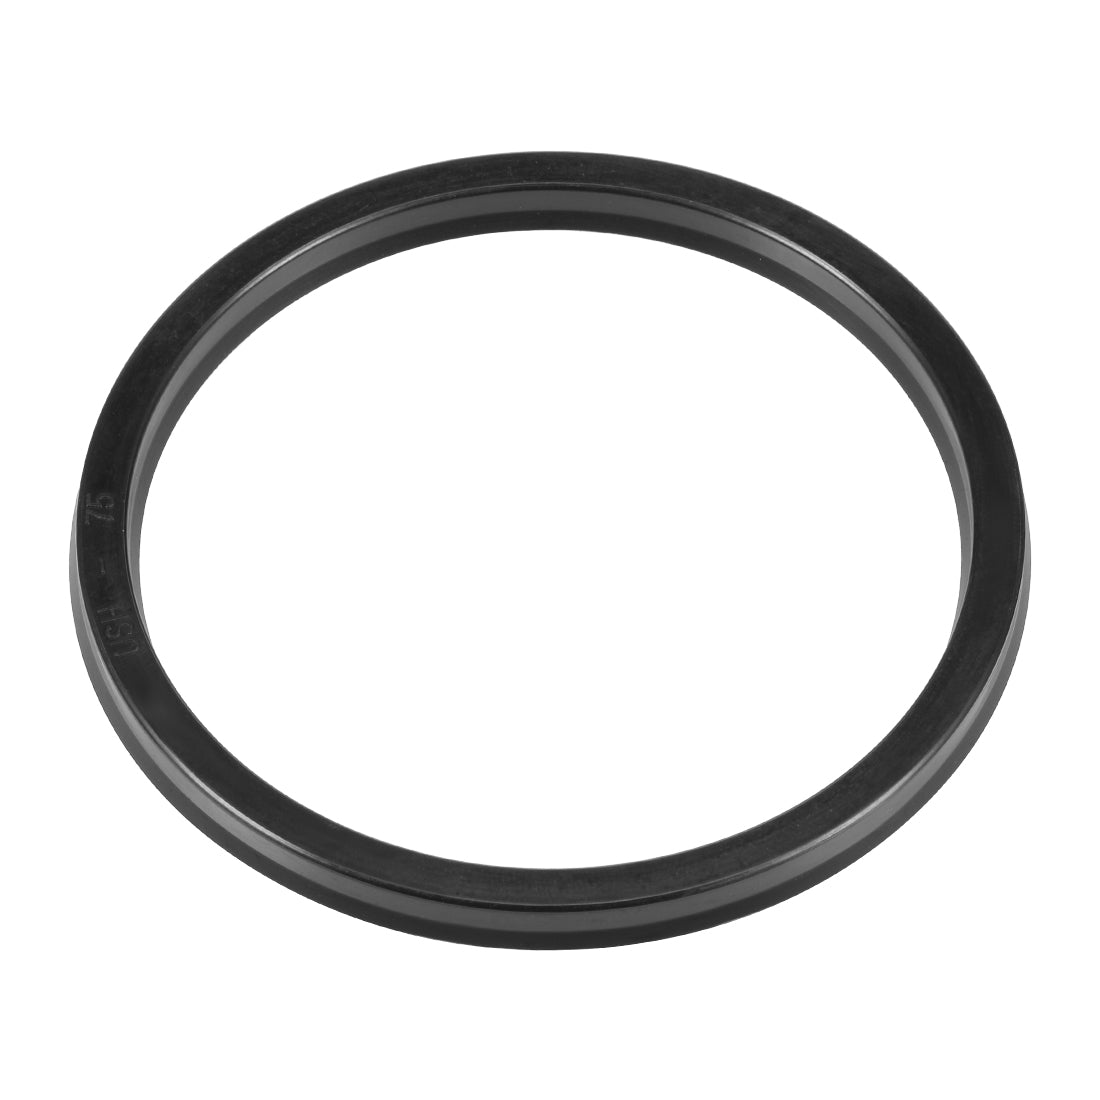 uxcell Uxcell Hydraulic Seal, Piston Shaft USH Oil Sealing O-Ring, 75mm x 85mm x 6mm